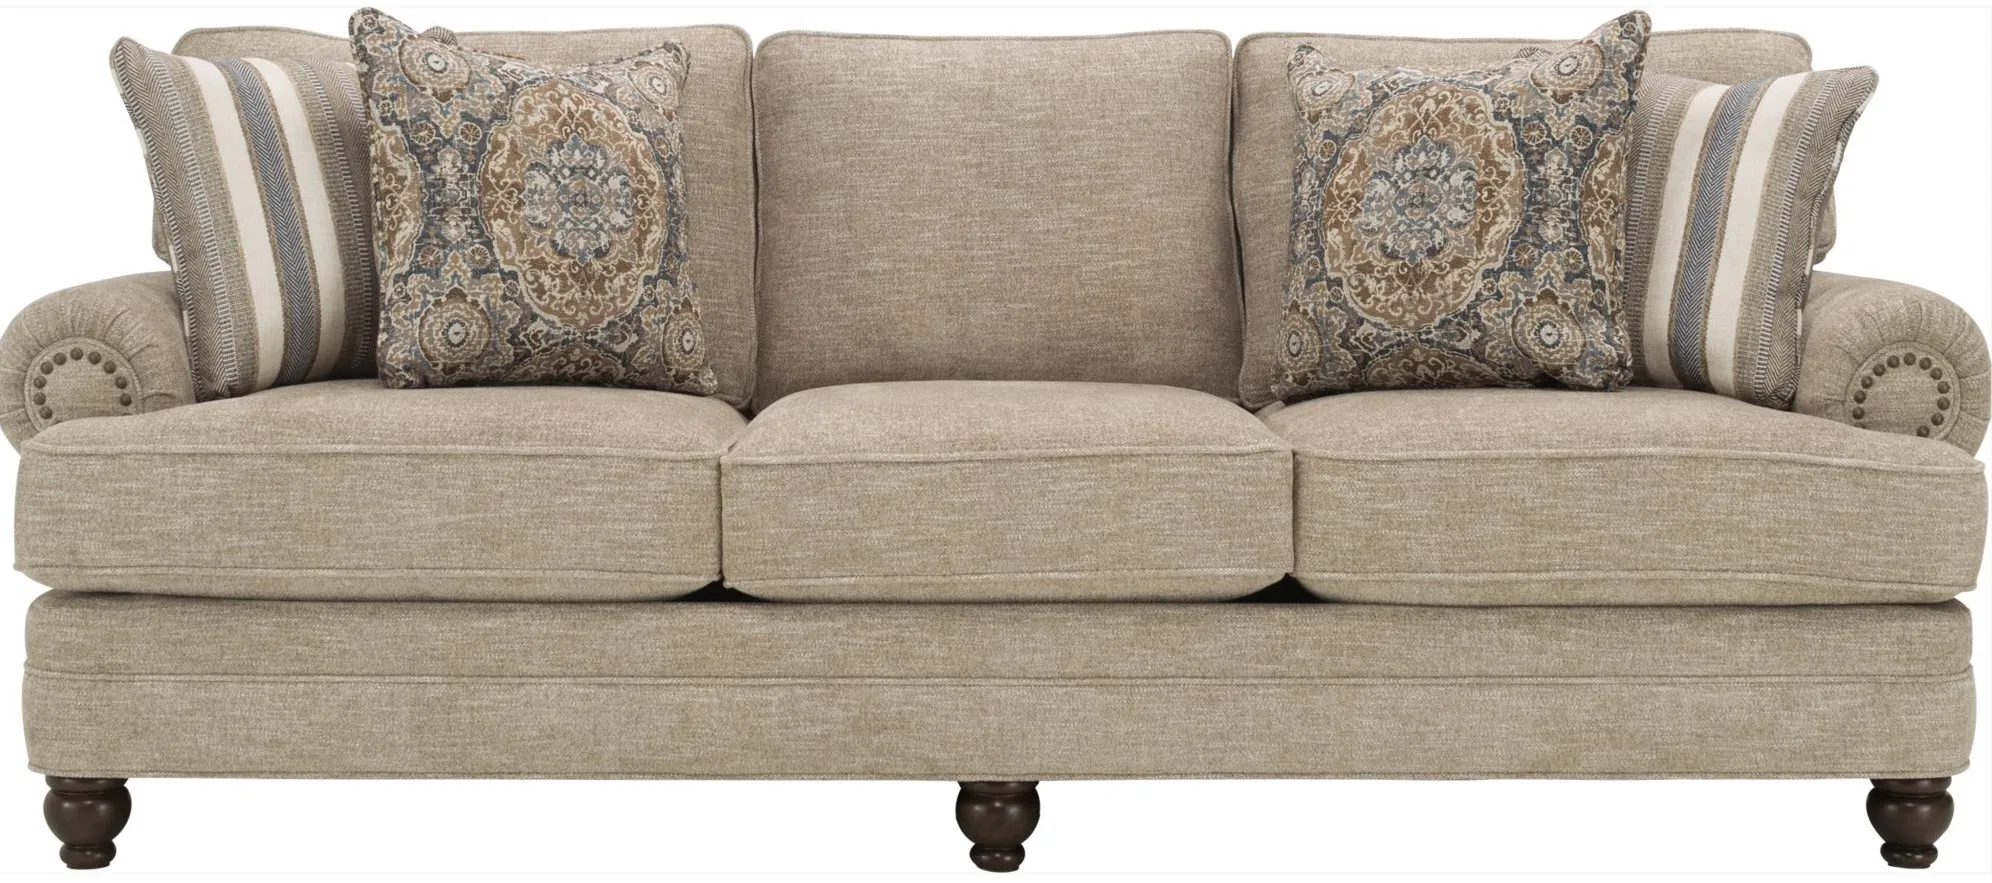 Tifton Chenille Sofa in Handwoven Linen by H.M. Richards